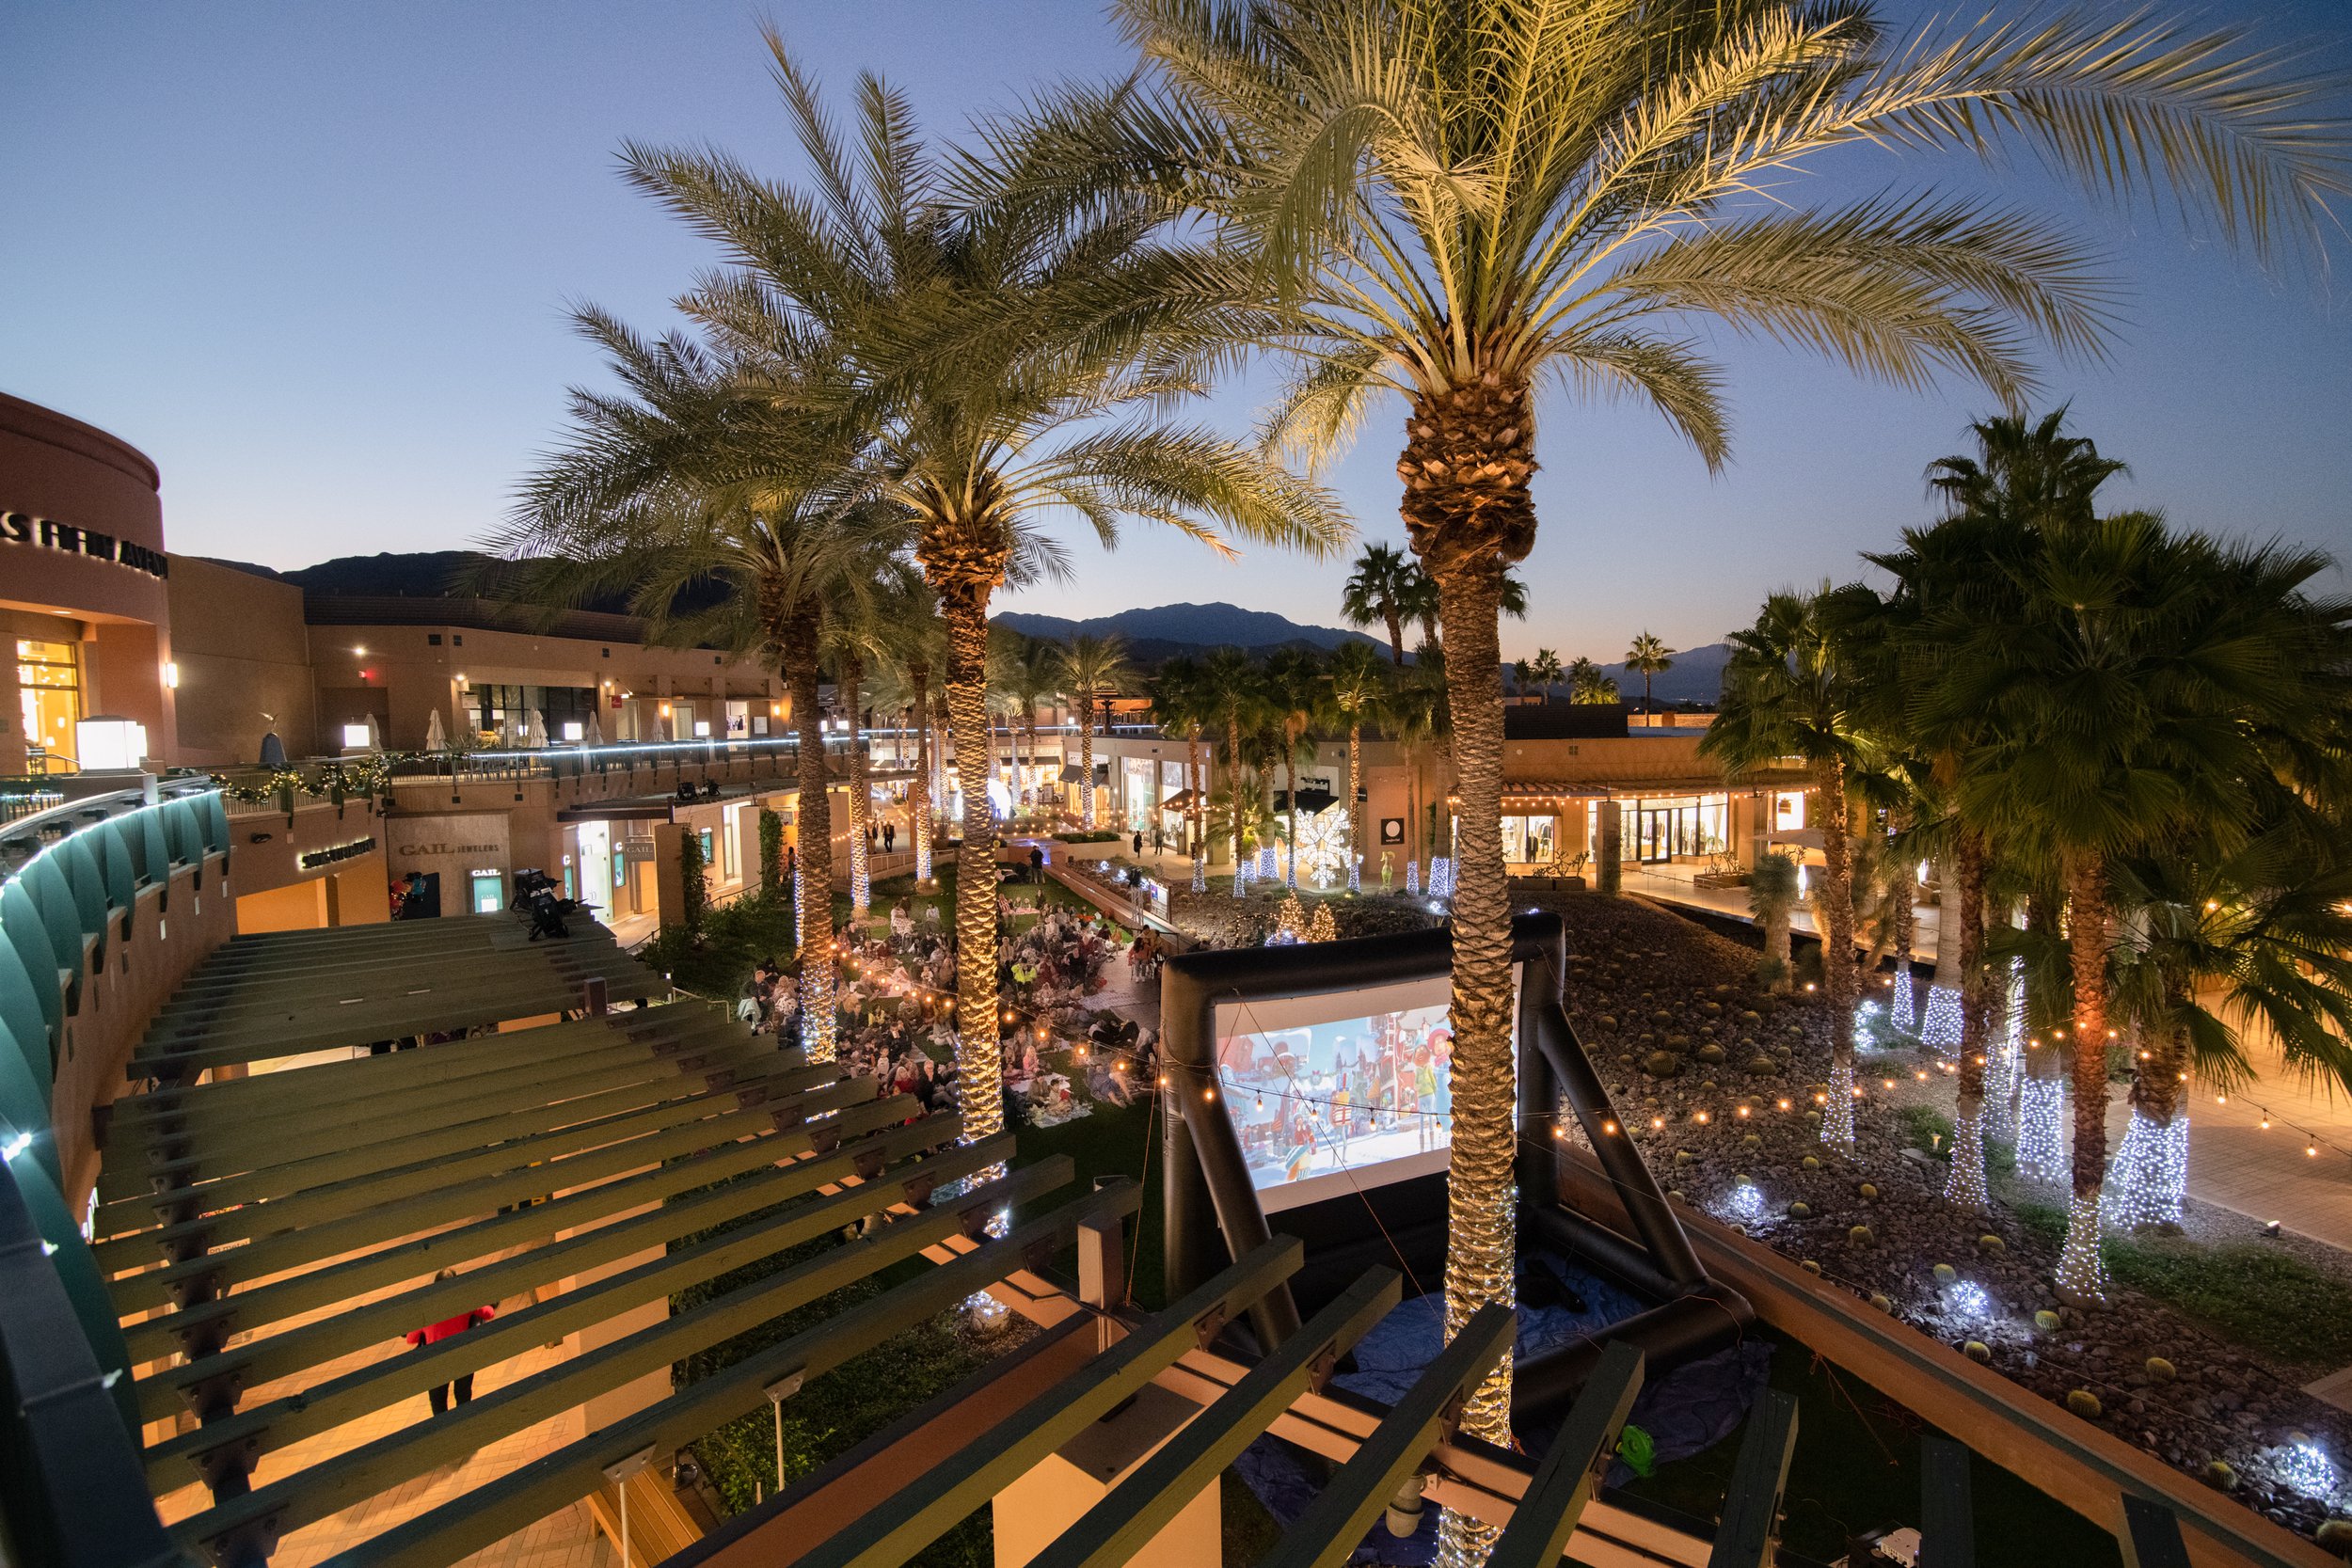 The Gardens at El Paseo Shopping District of Palm Desert